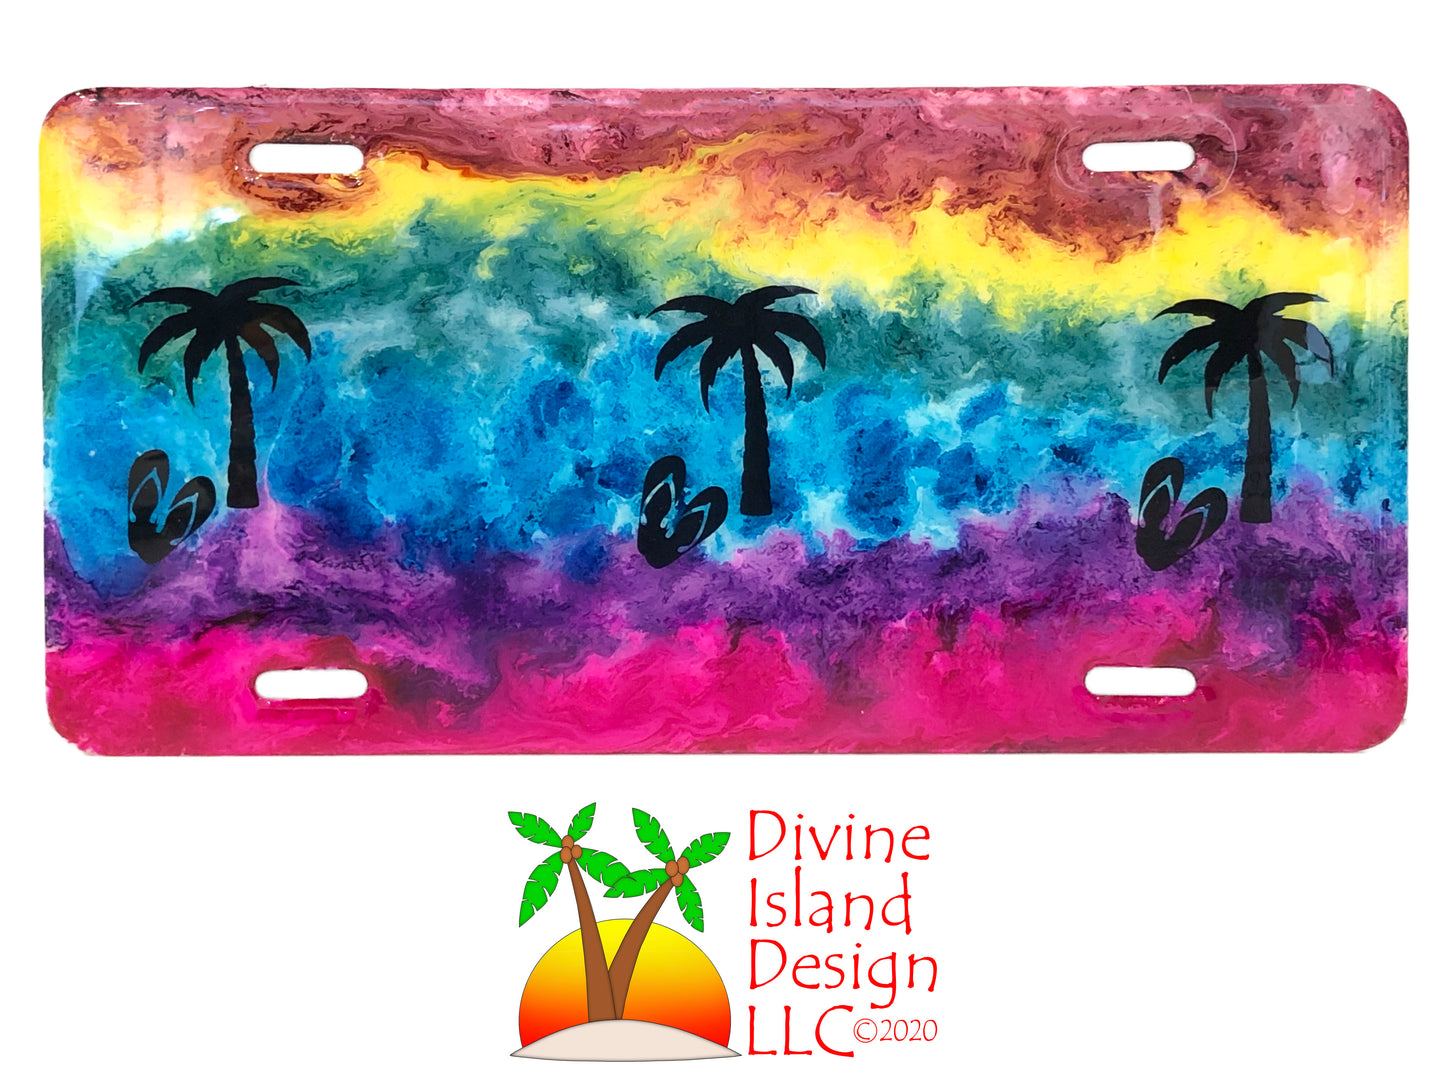 Vanity License Plate - Rainbow w/Palm Trees and Flip Flops